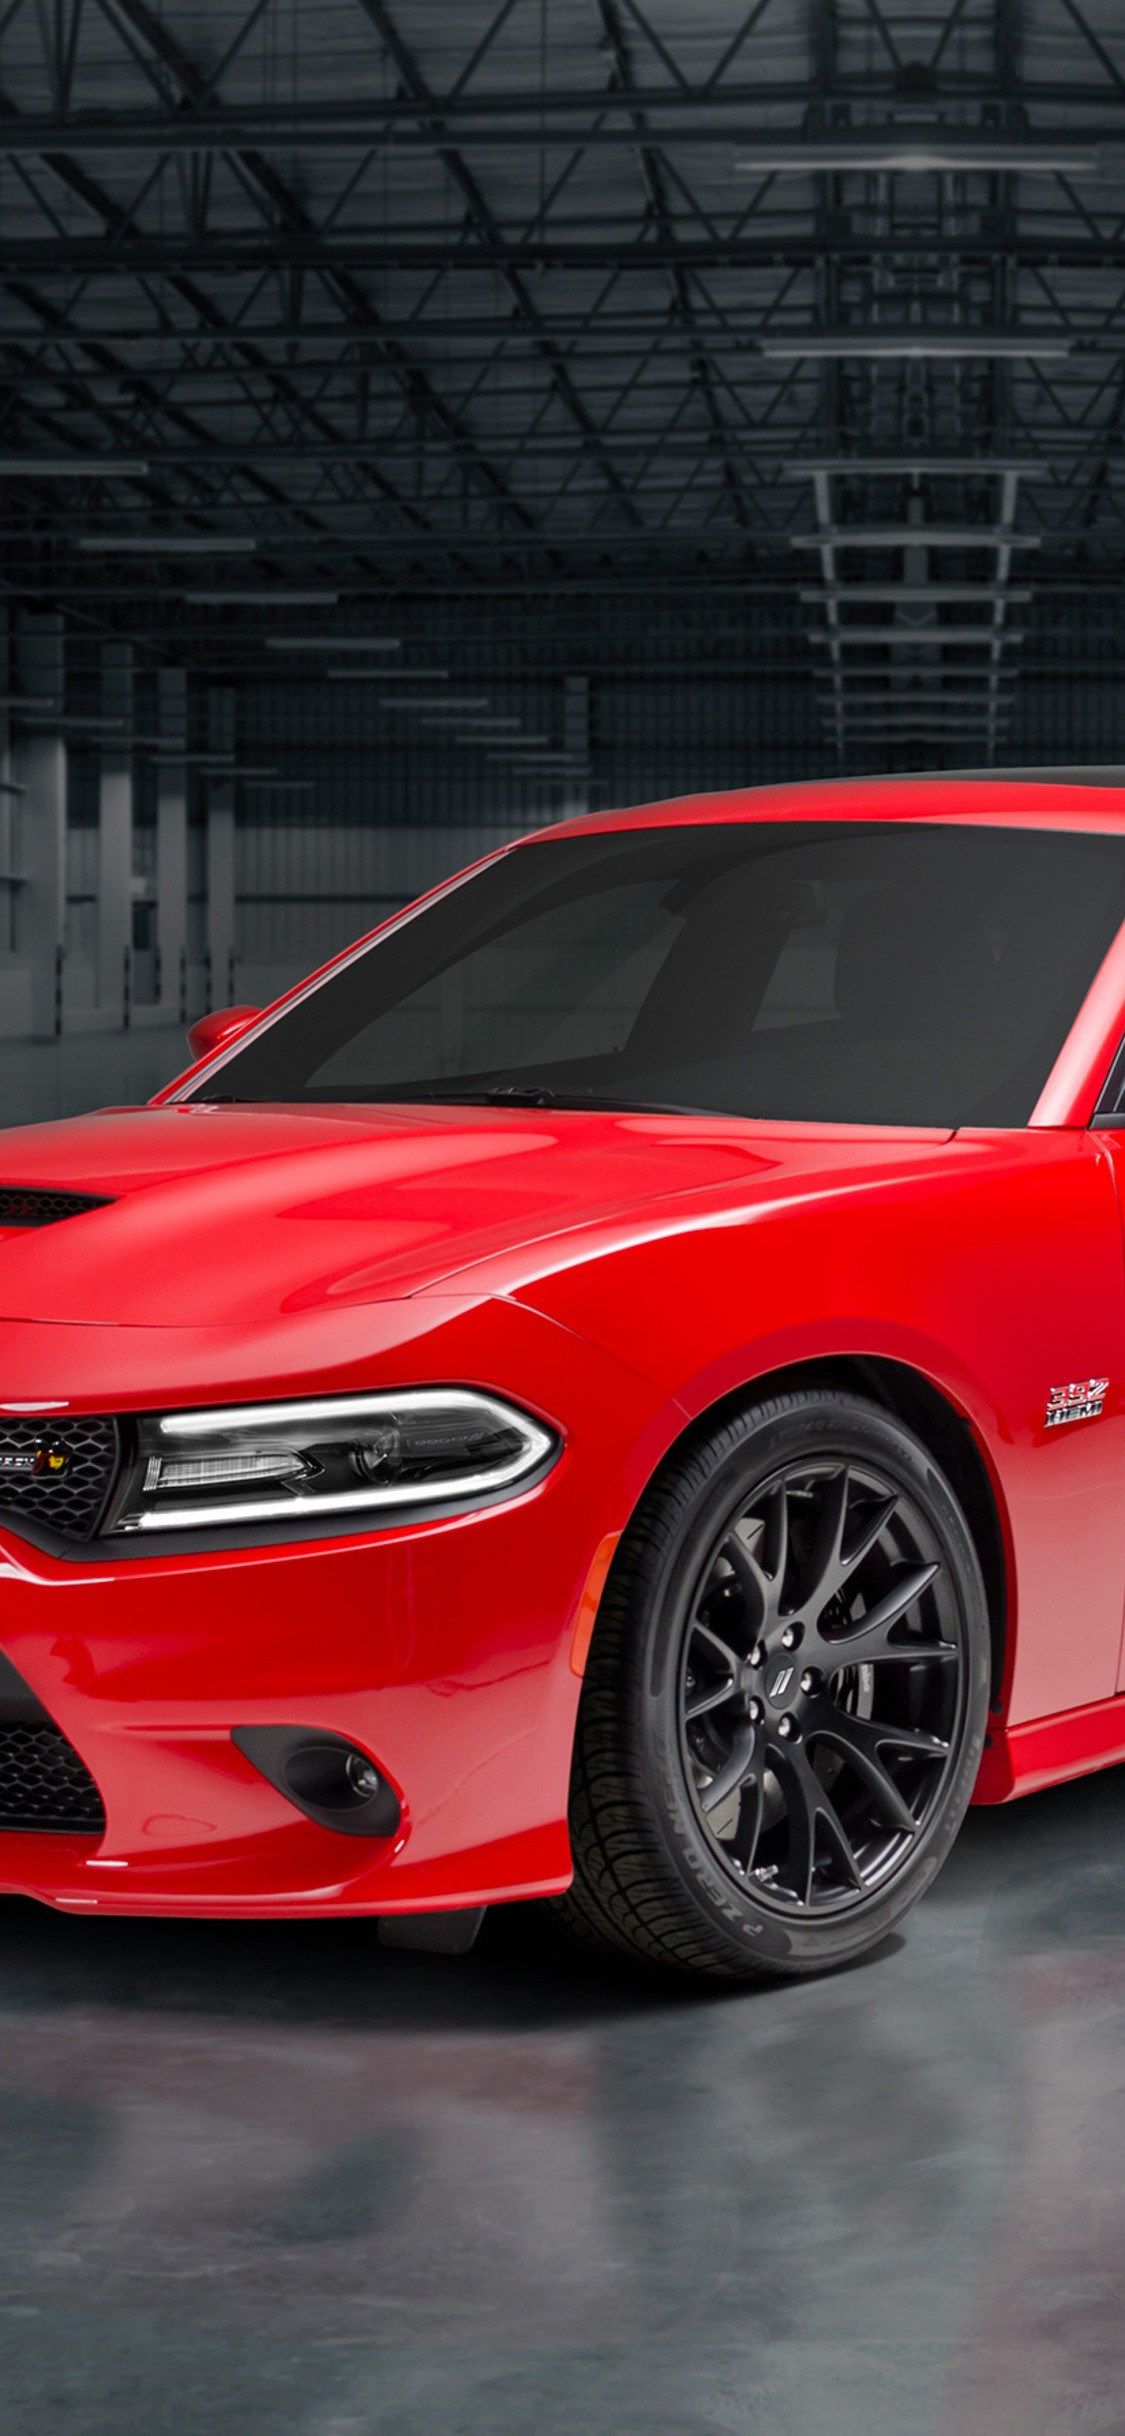 Dodge Charger Wallpaper iPhone X wengerluggagesave